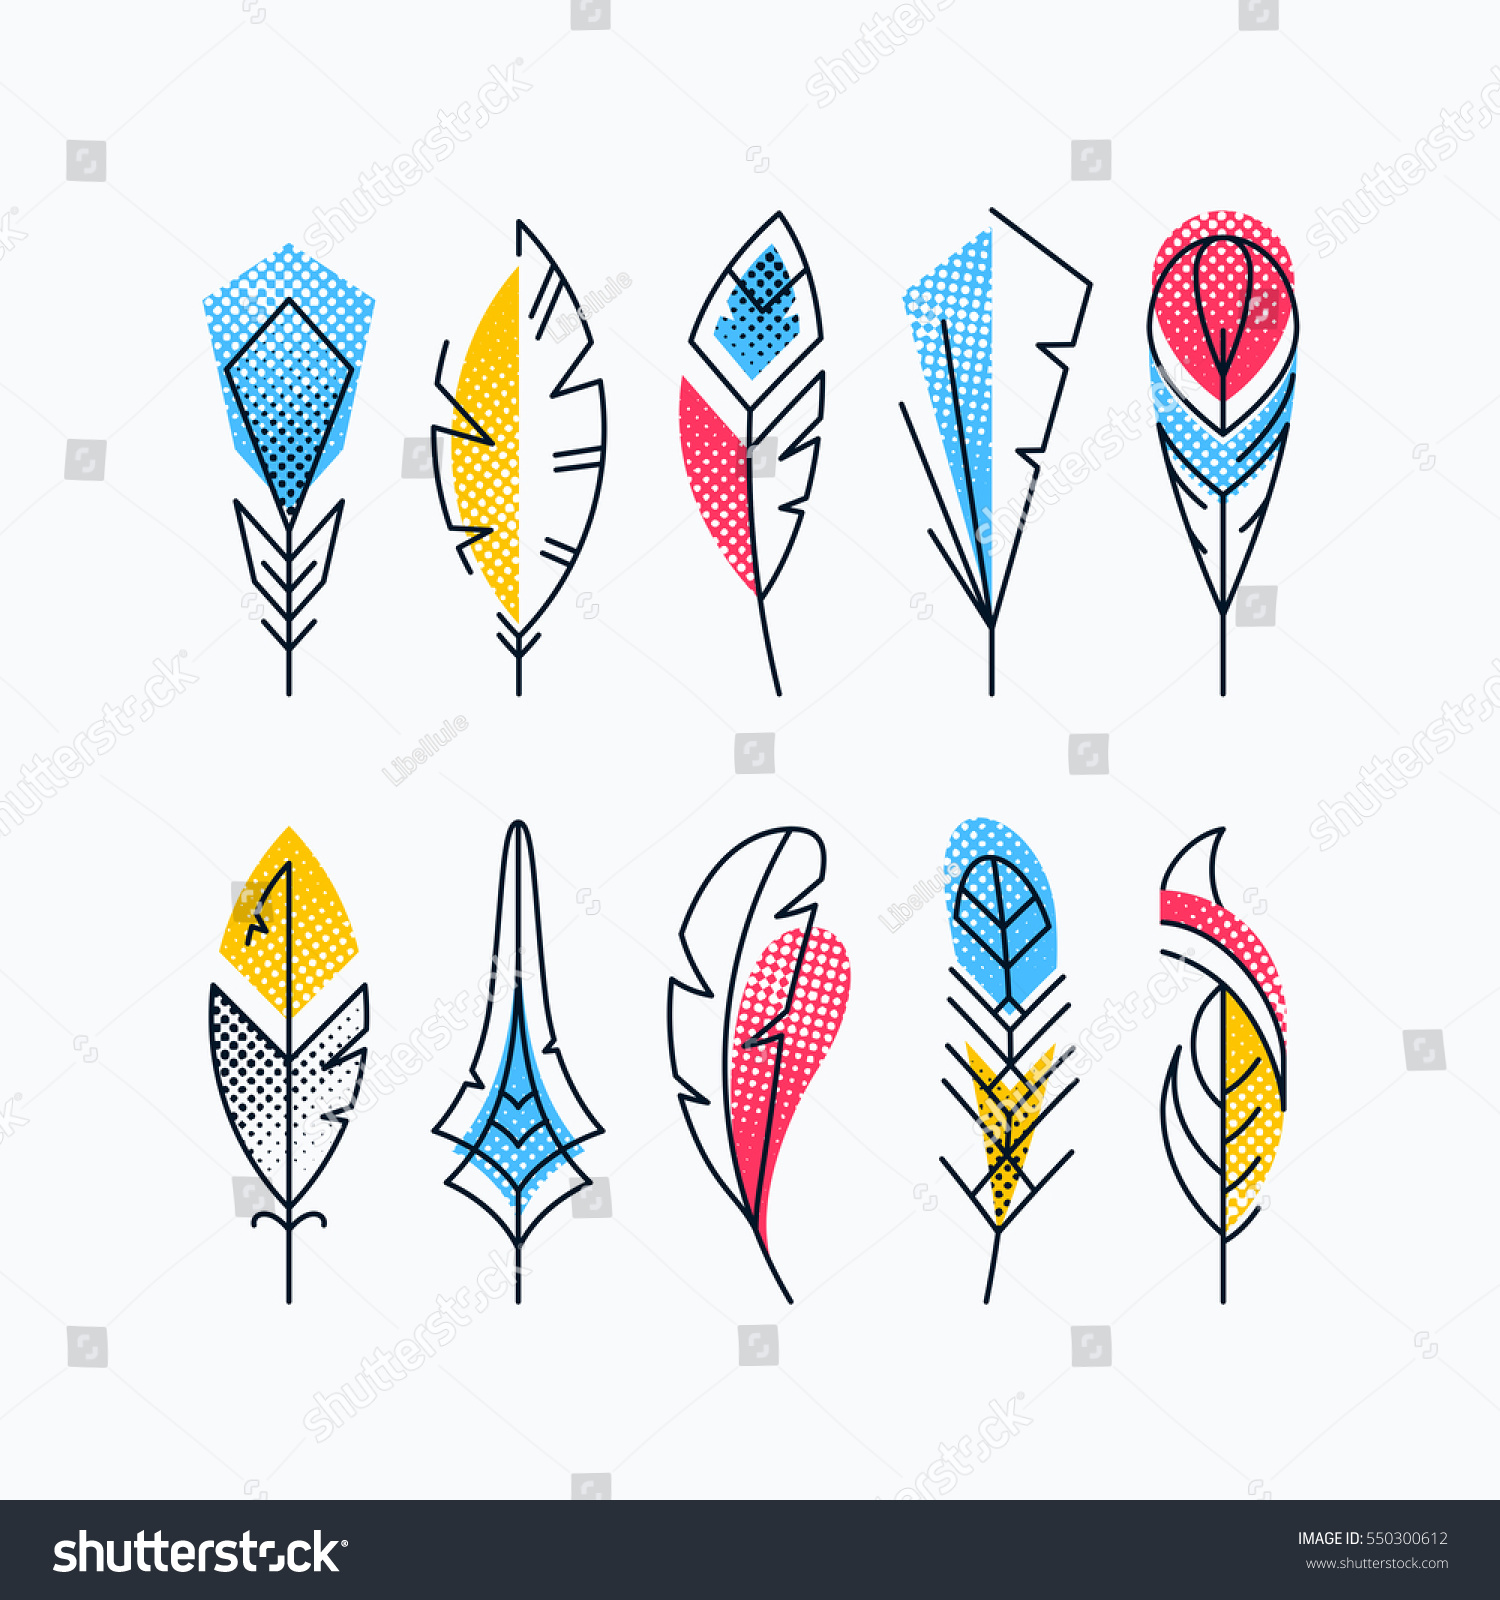 stock-vector-colorful-abstract-feathers-set-halftone-textured-bright-line-vector-symbols-550300612